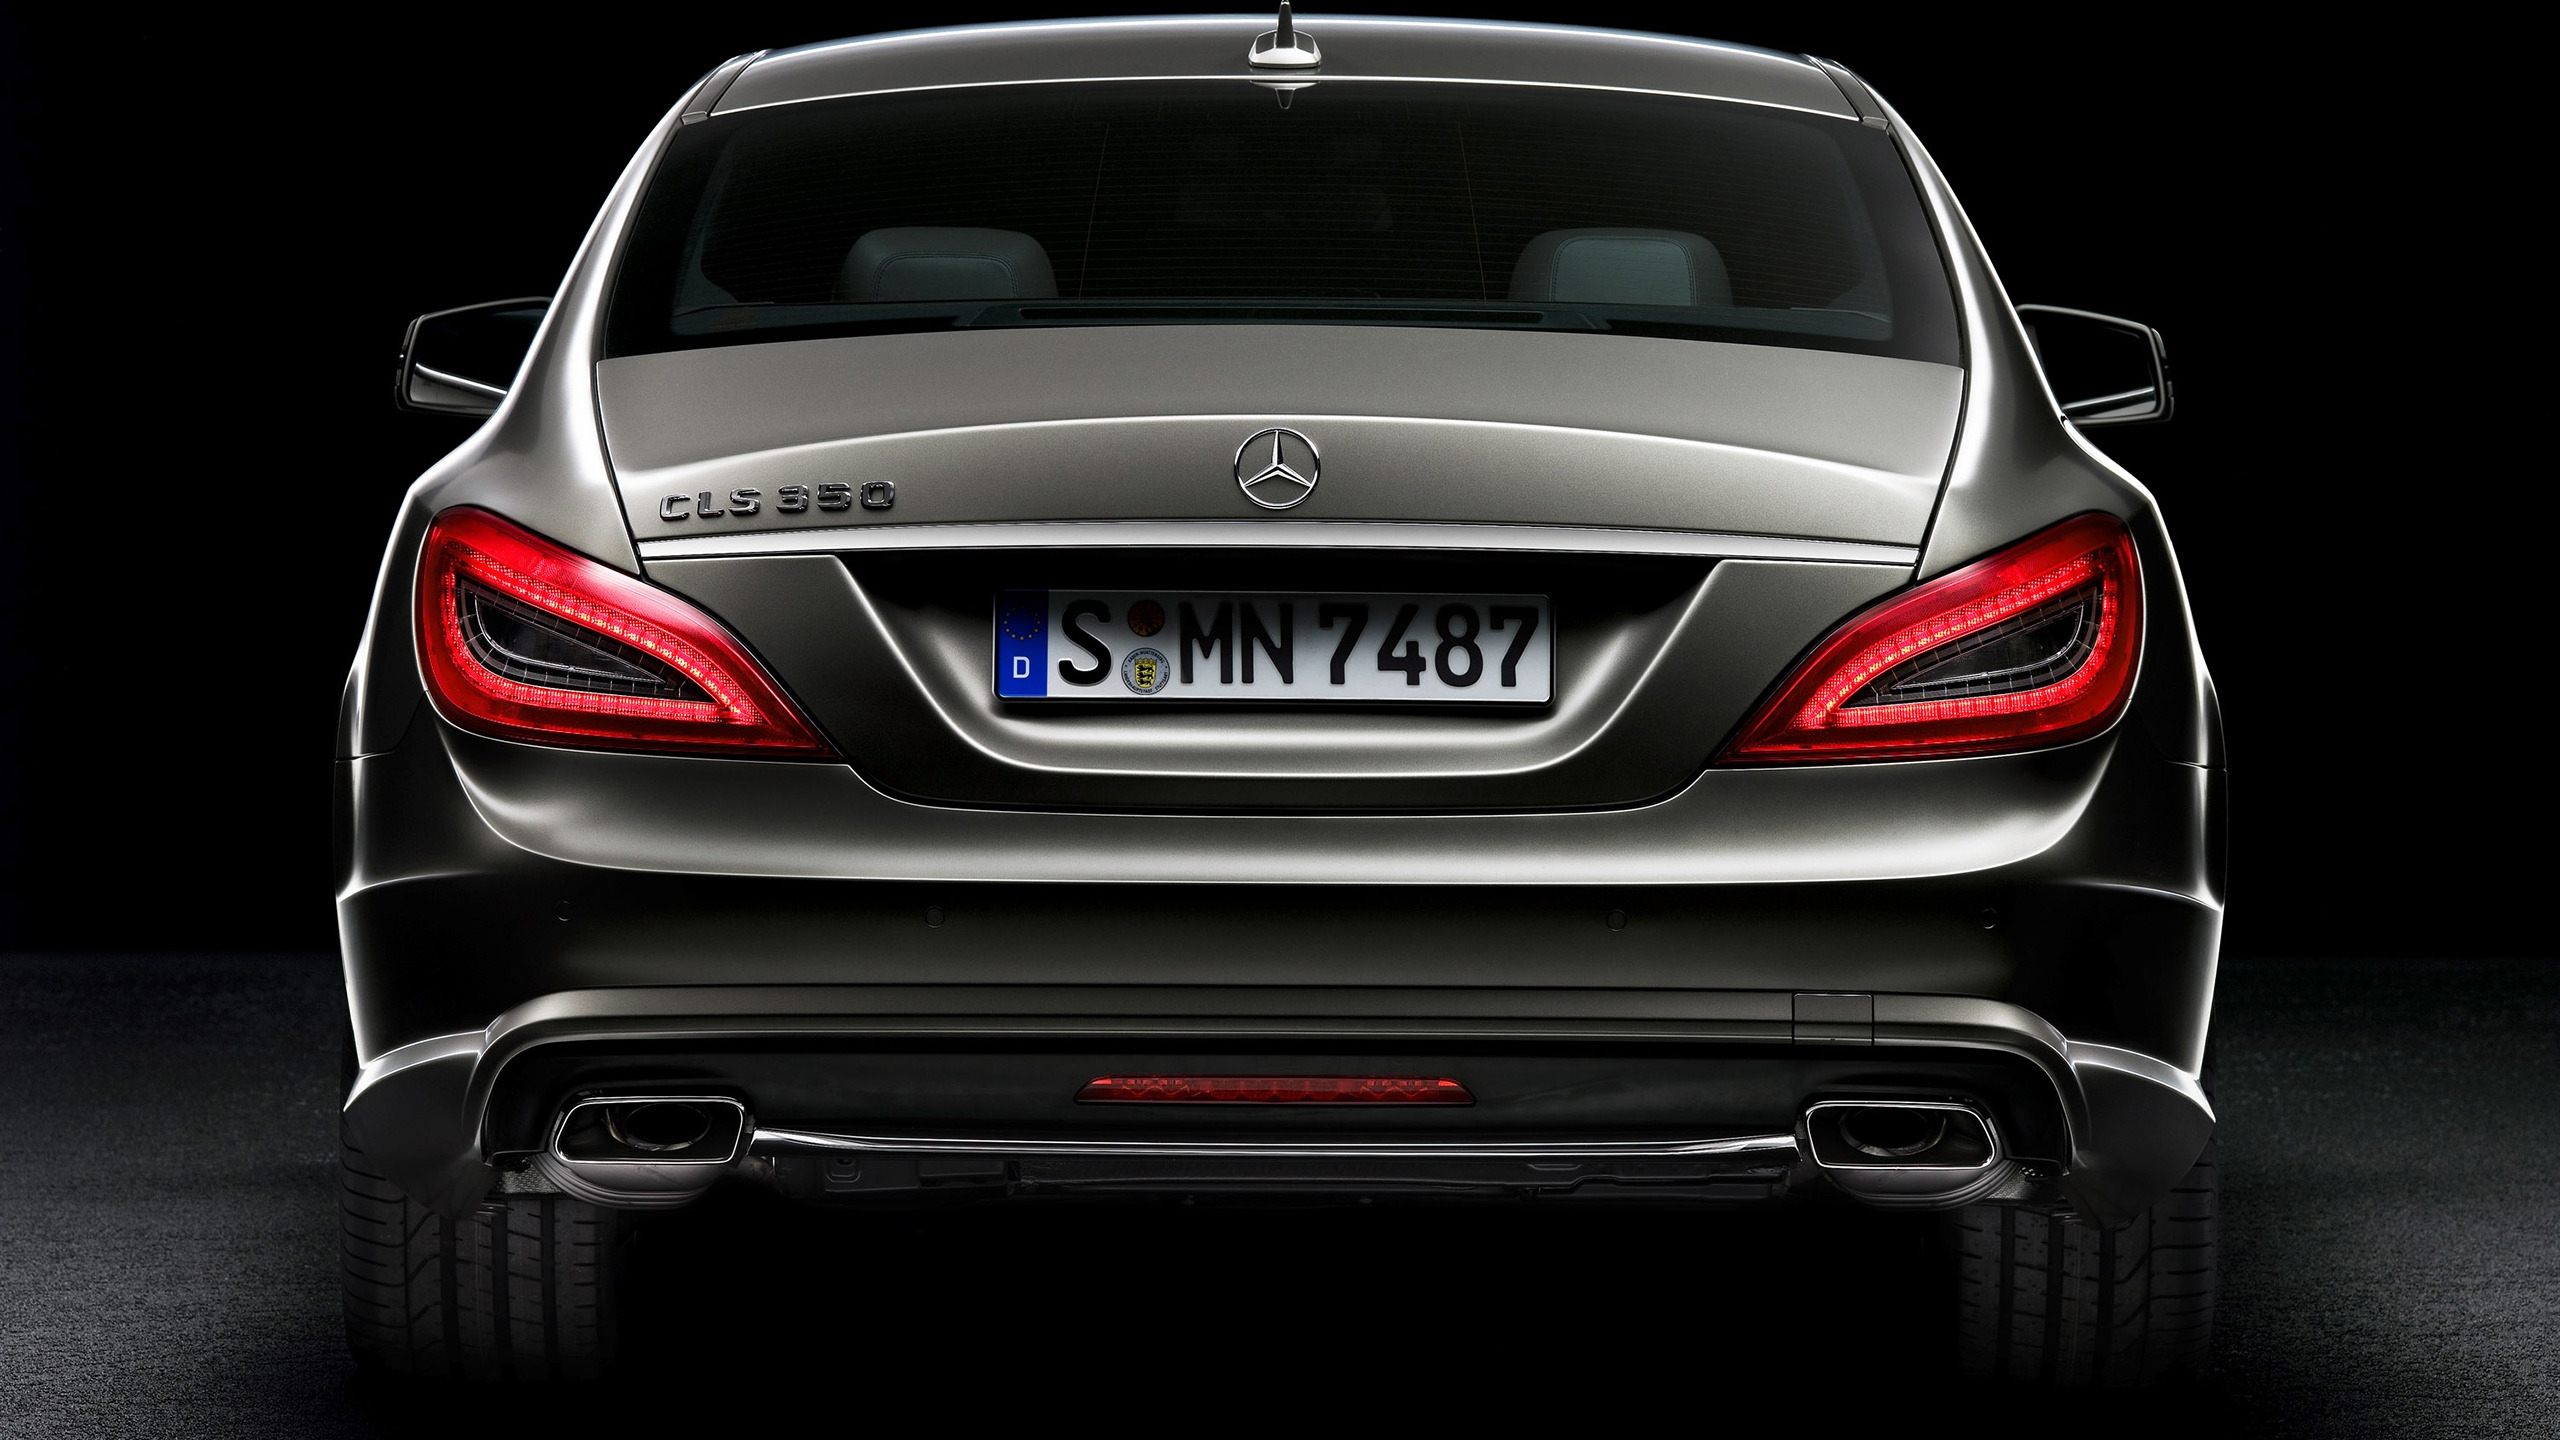 2012 Mercedes Benz CLS Rear for 2560x1440 HDTV resolution